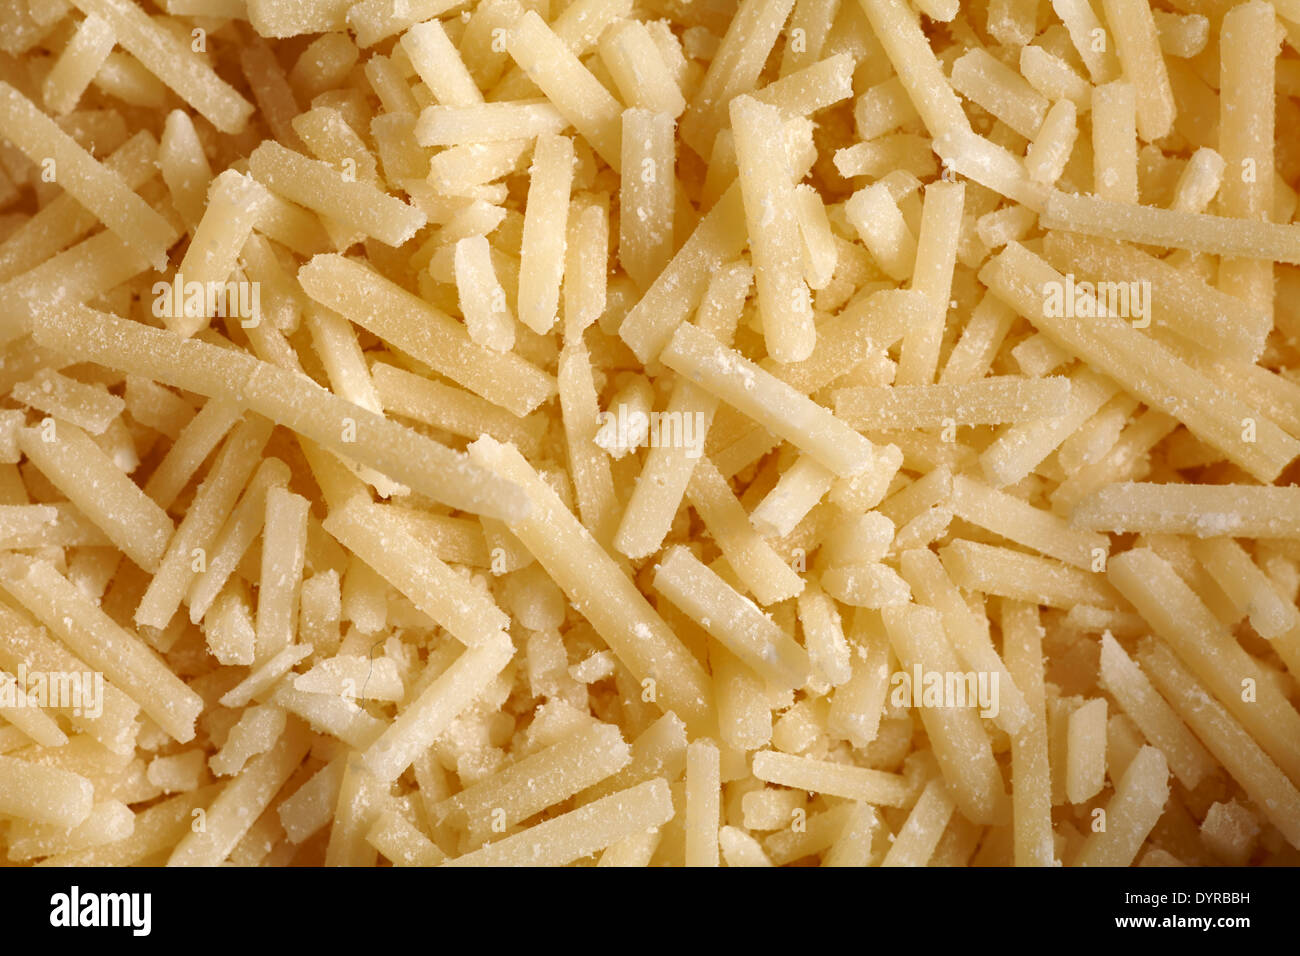 Shreds of Parmesan cheese Stock Photo